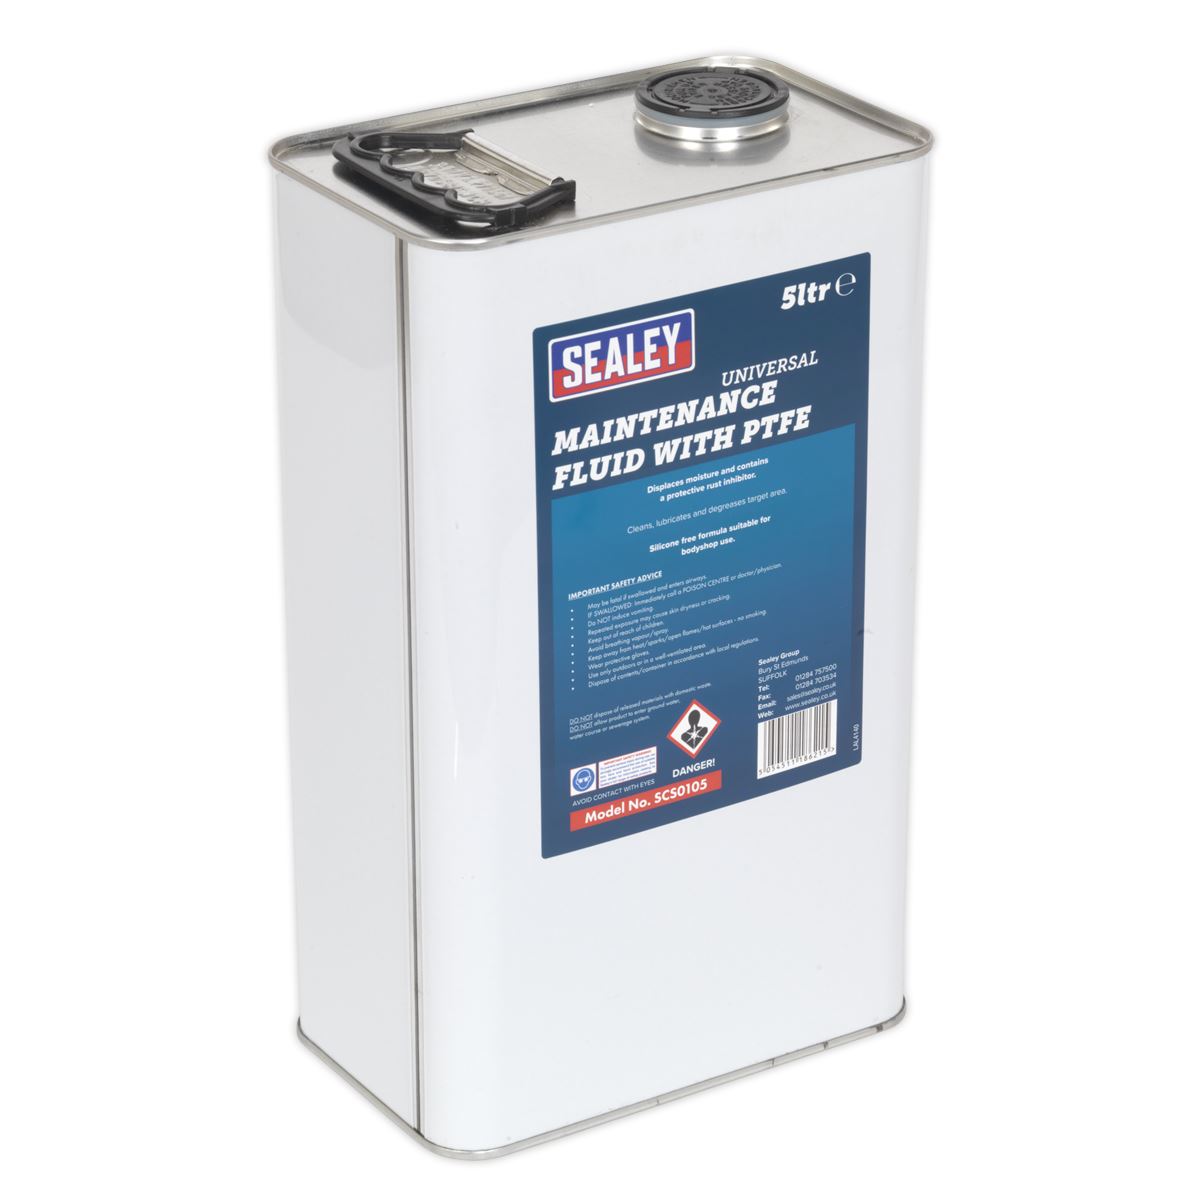 Sealey Universal Maintenance Fluid with PTFE 5L